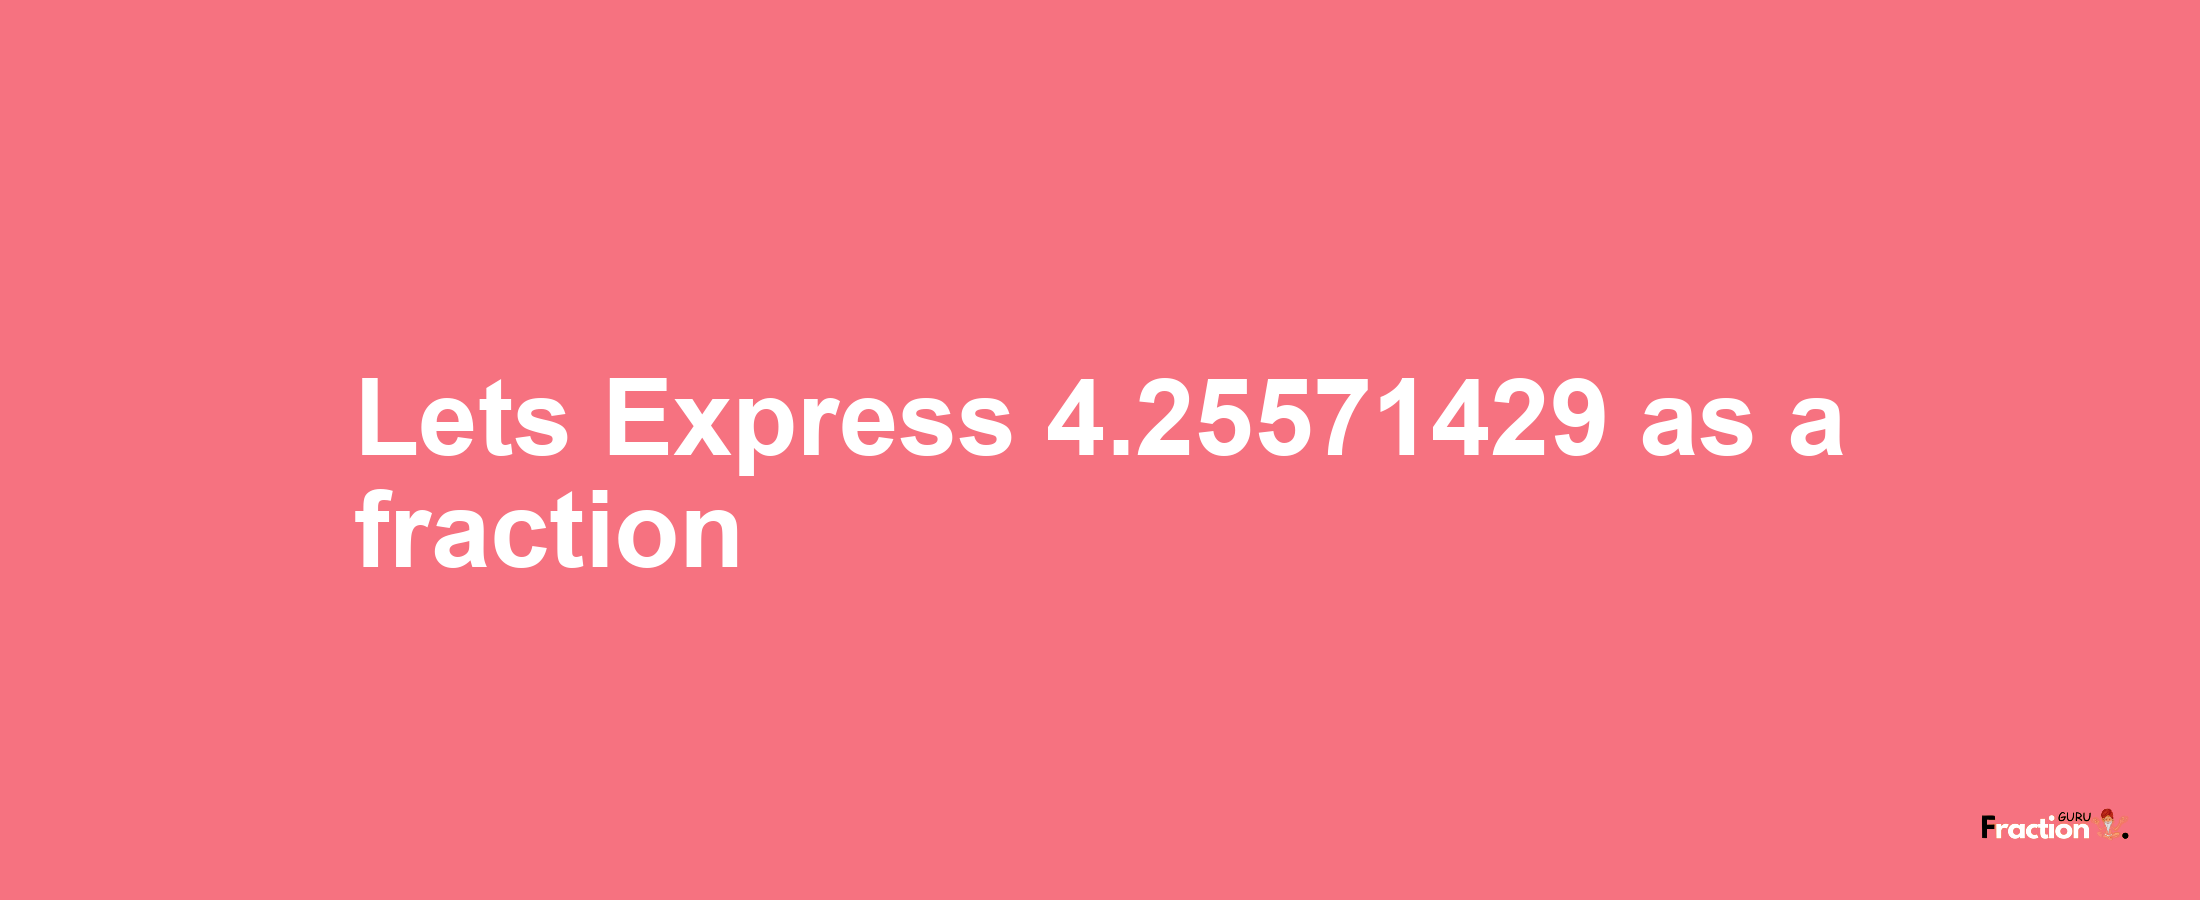 Lets Express 4.25571429 as afraction